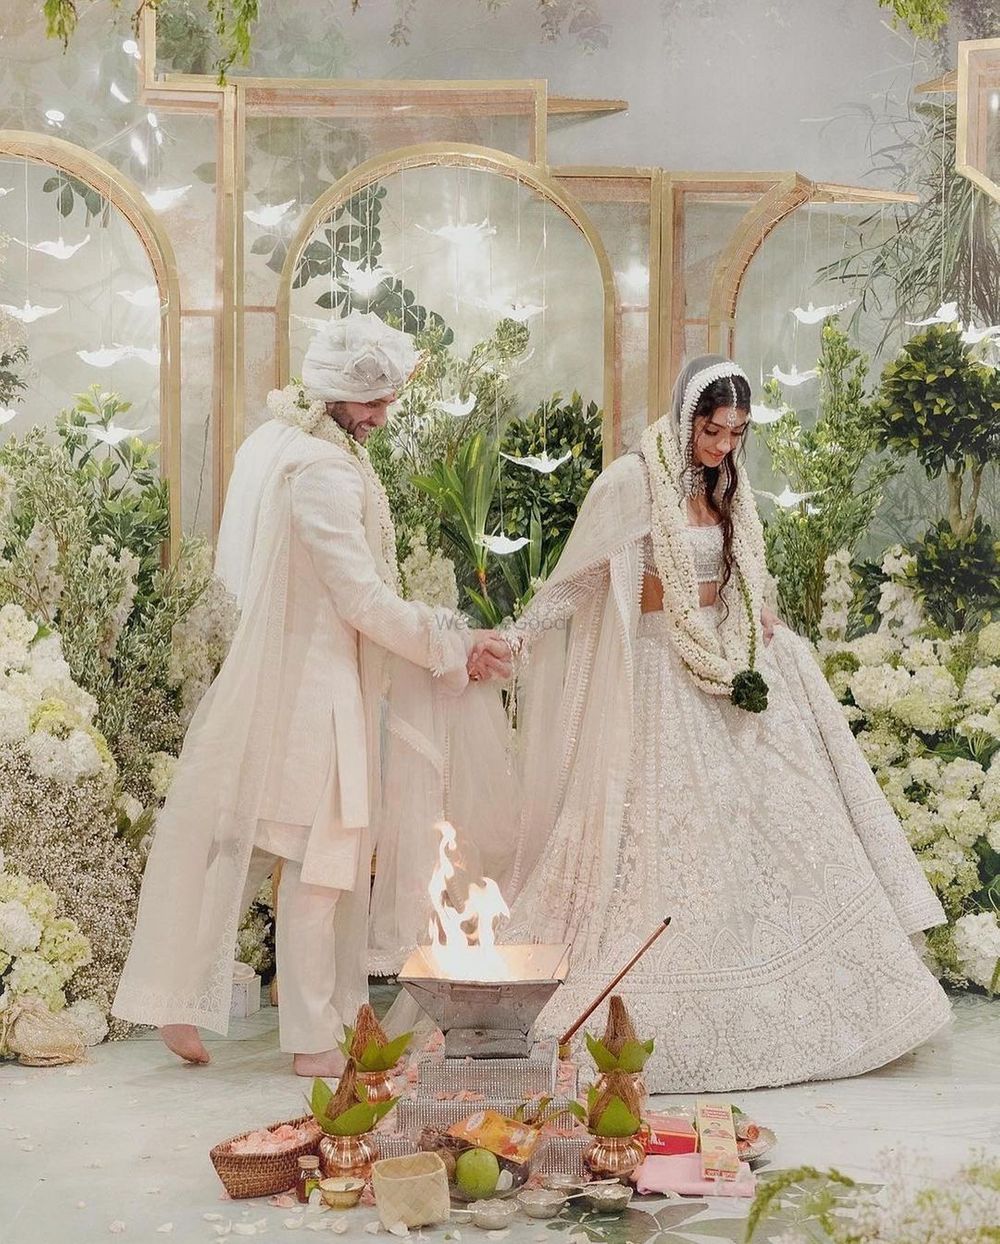 Photo of Alanna and Ivor in white custom Manish Malhotra outfits on their wedding day